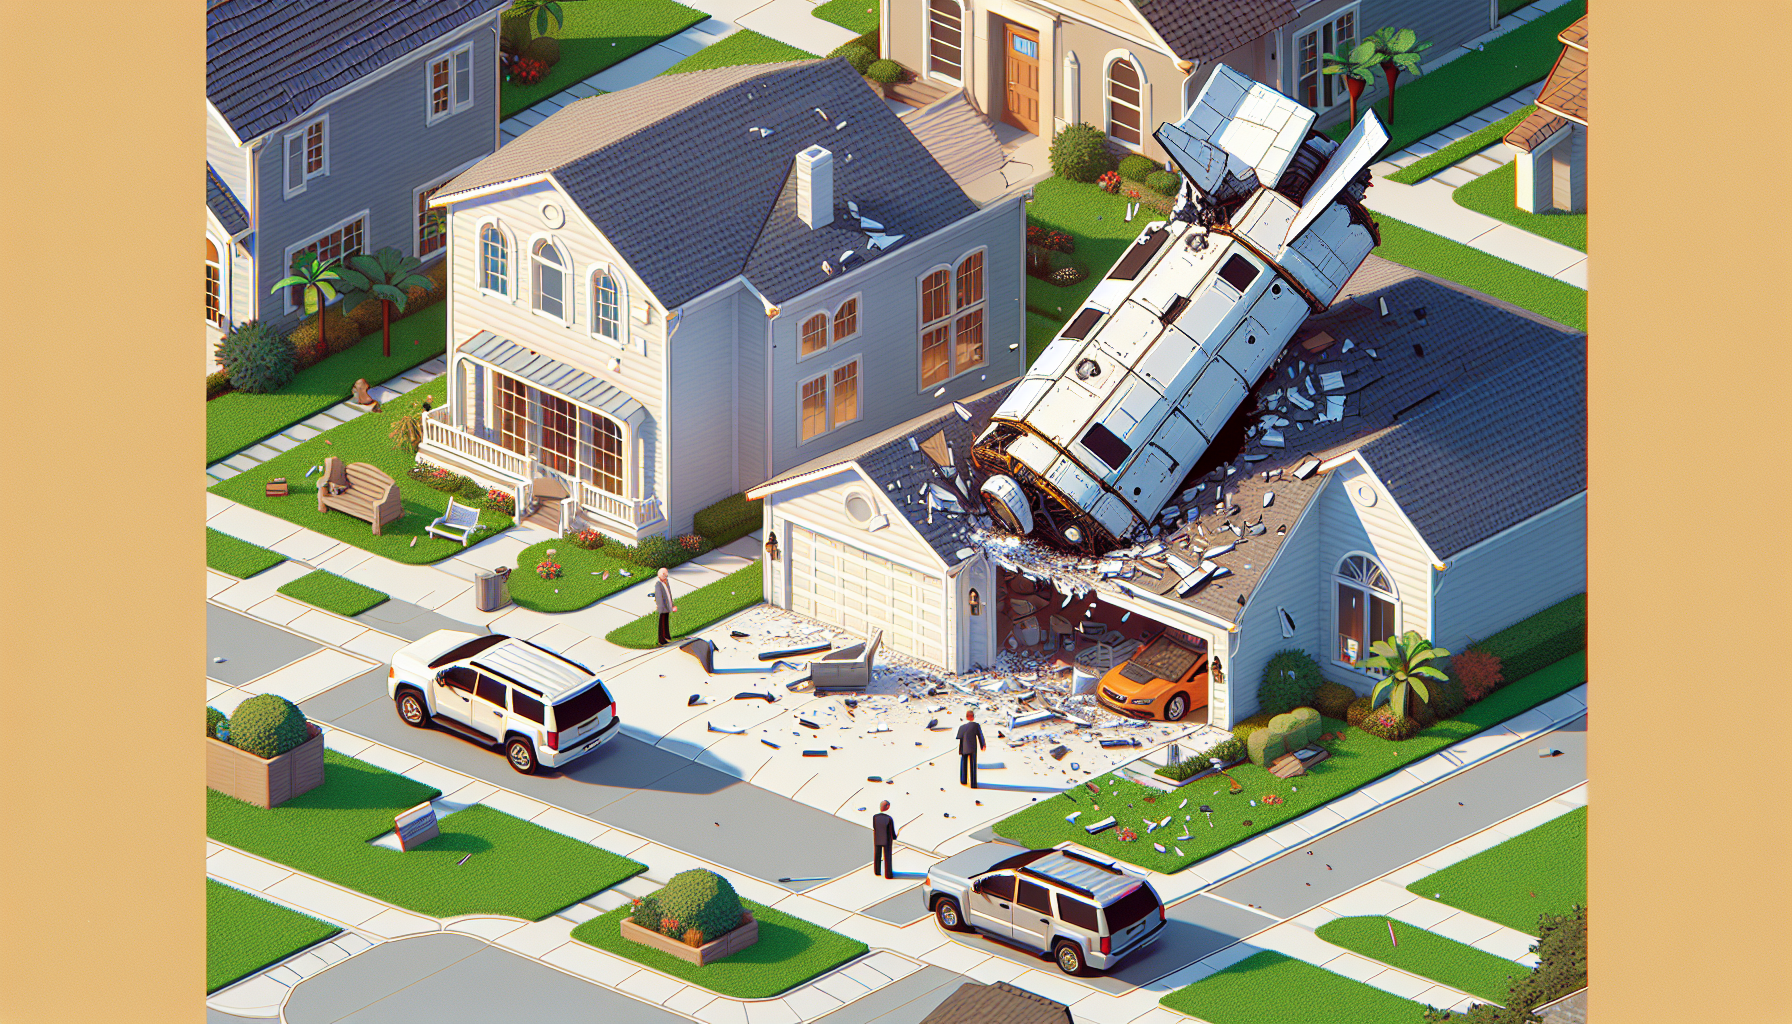 NASA Verifies That Space Junk Pierced Through the Roof of a House in Florida